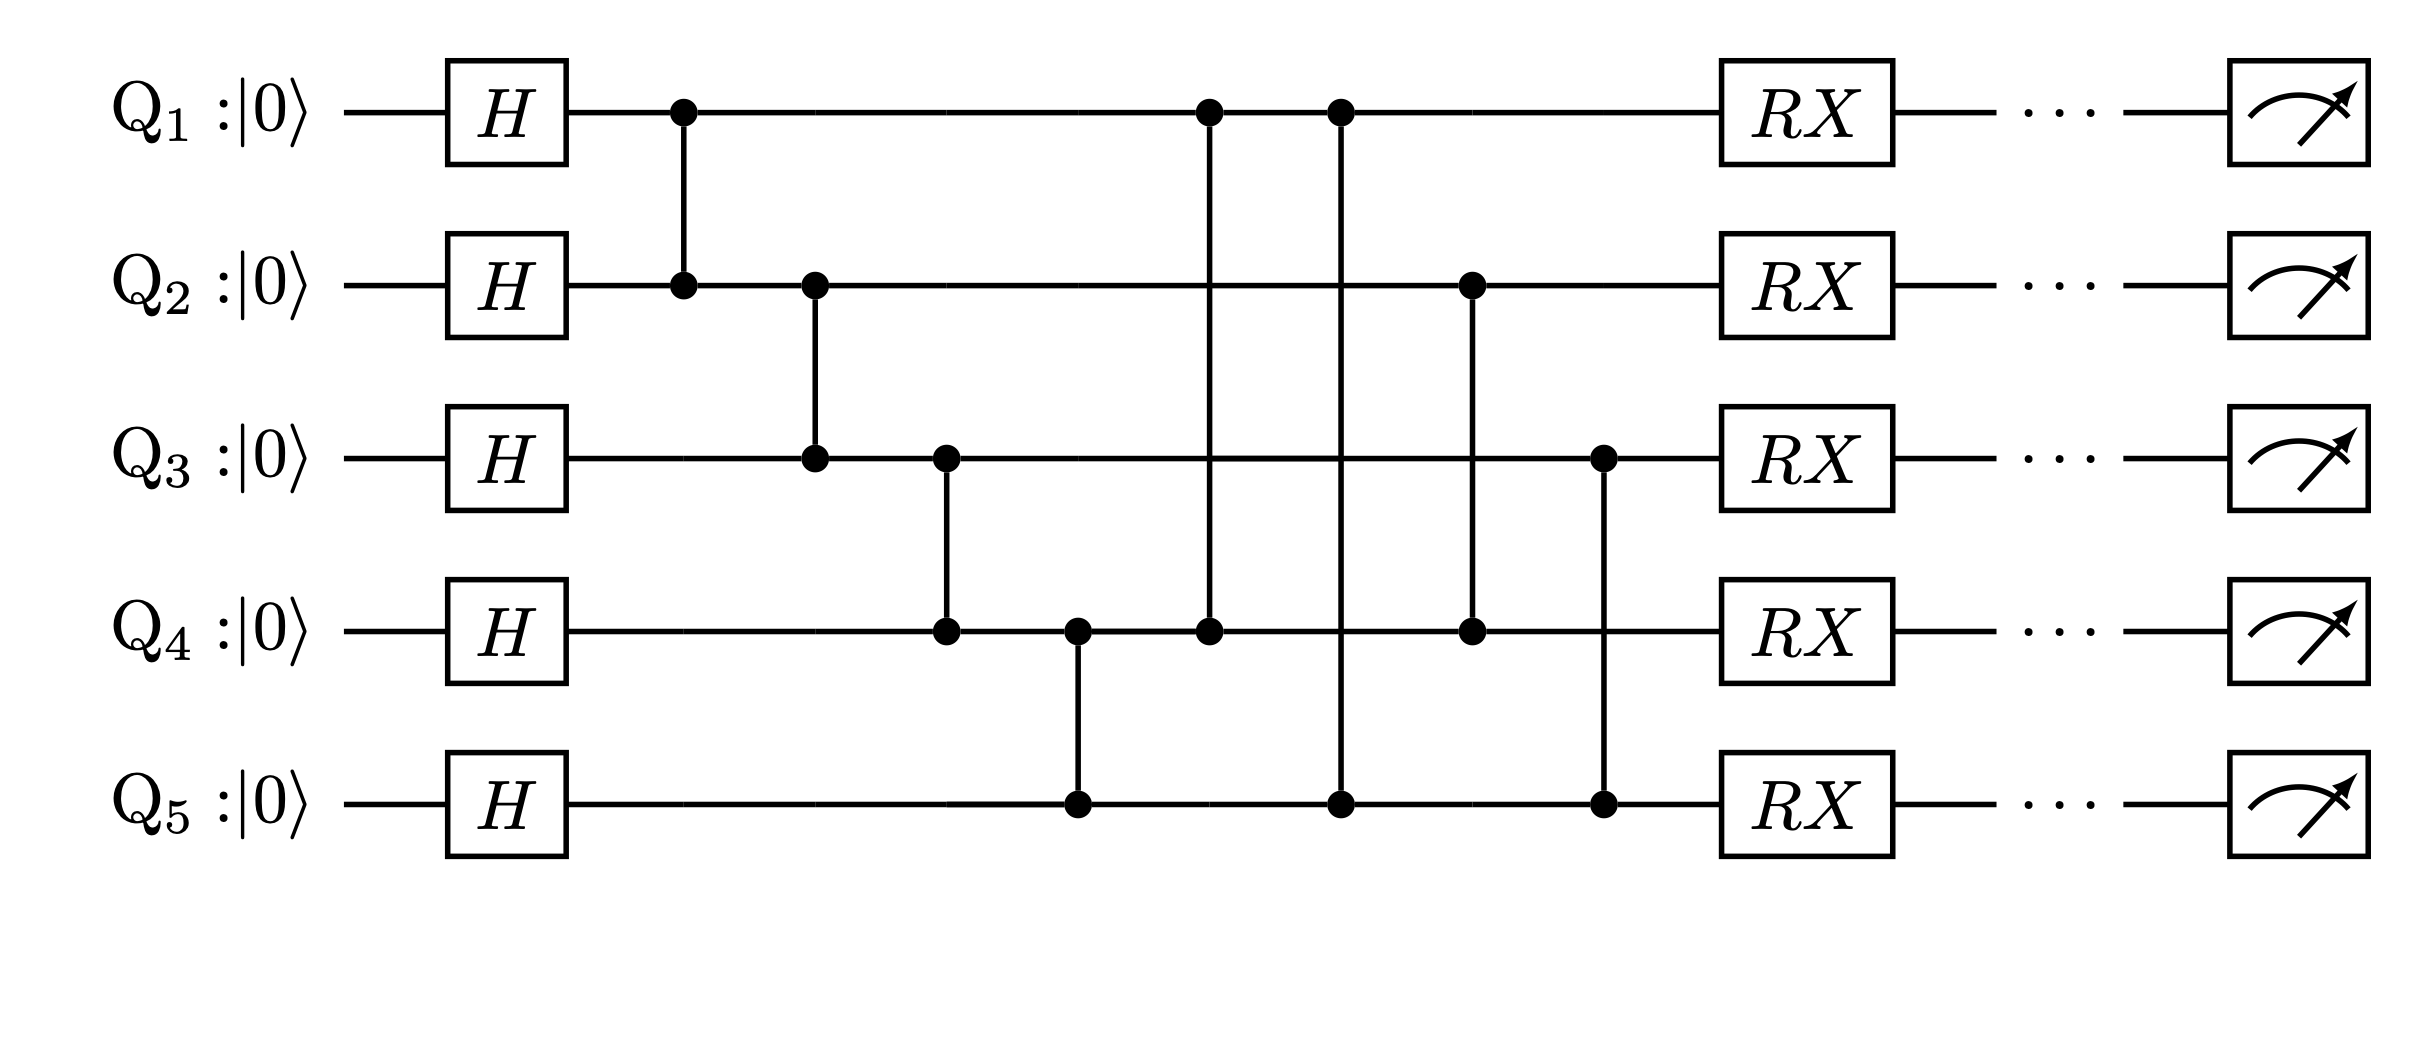 routing_example_circuit_2